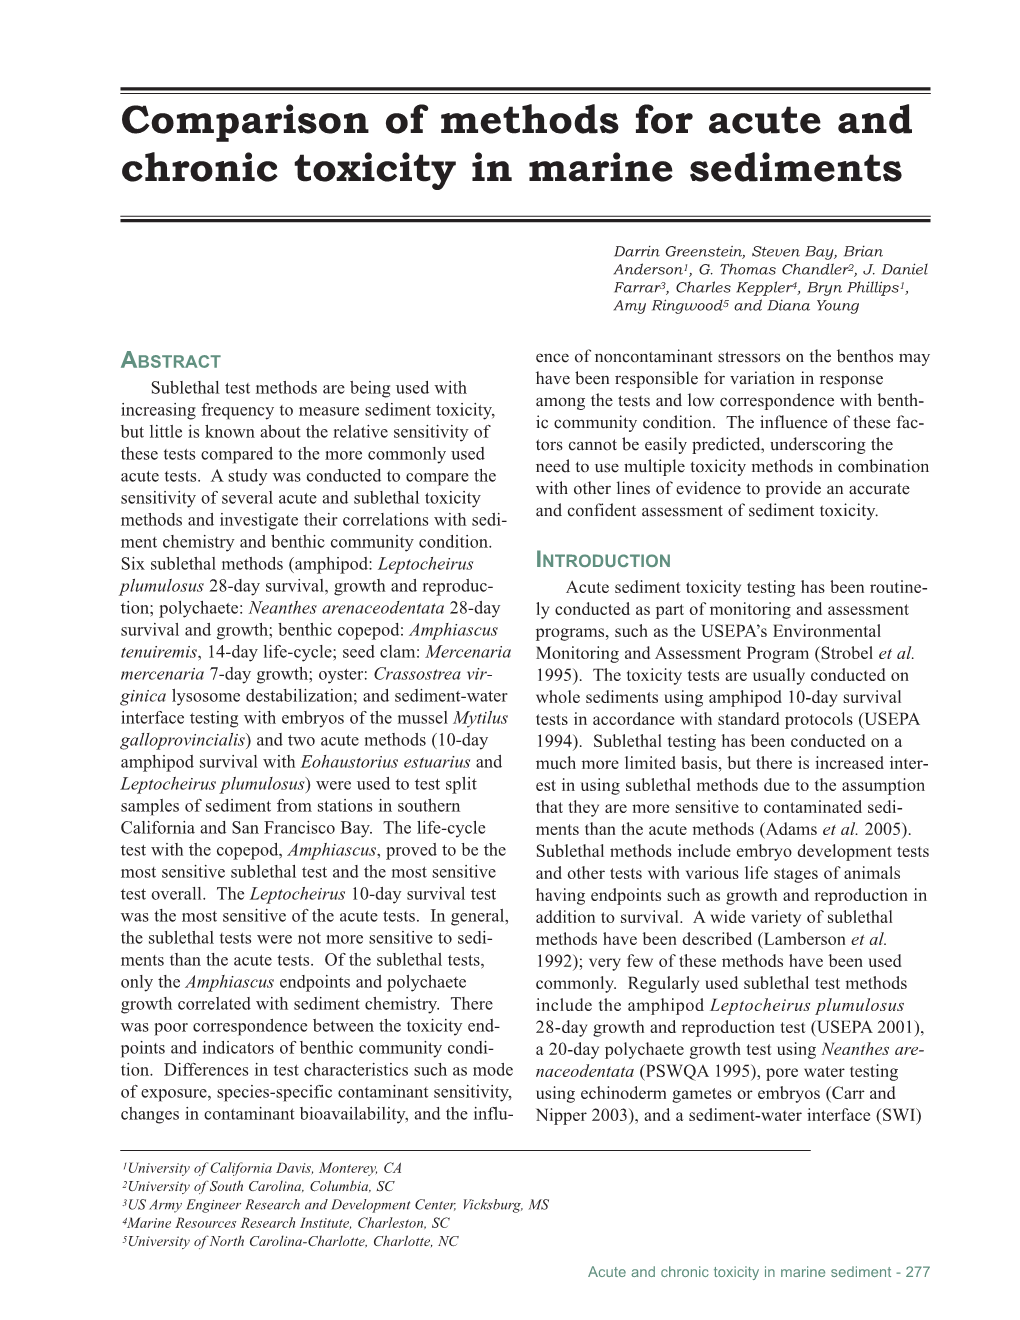 Comparison of Methods for Acute and Chronic Toxicity in Marine Sediments